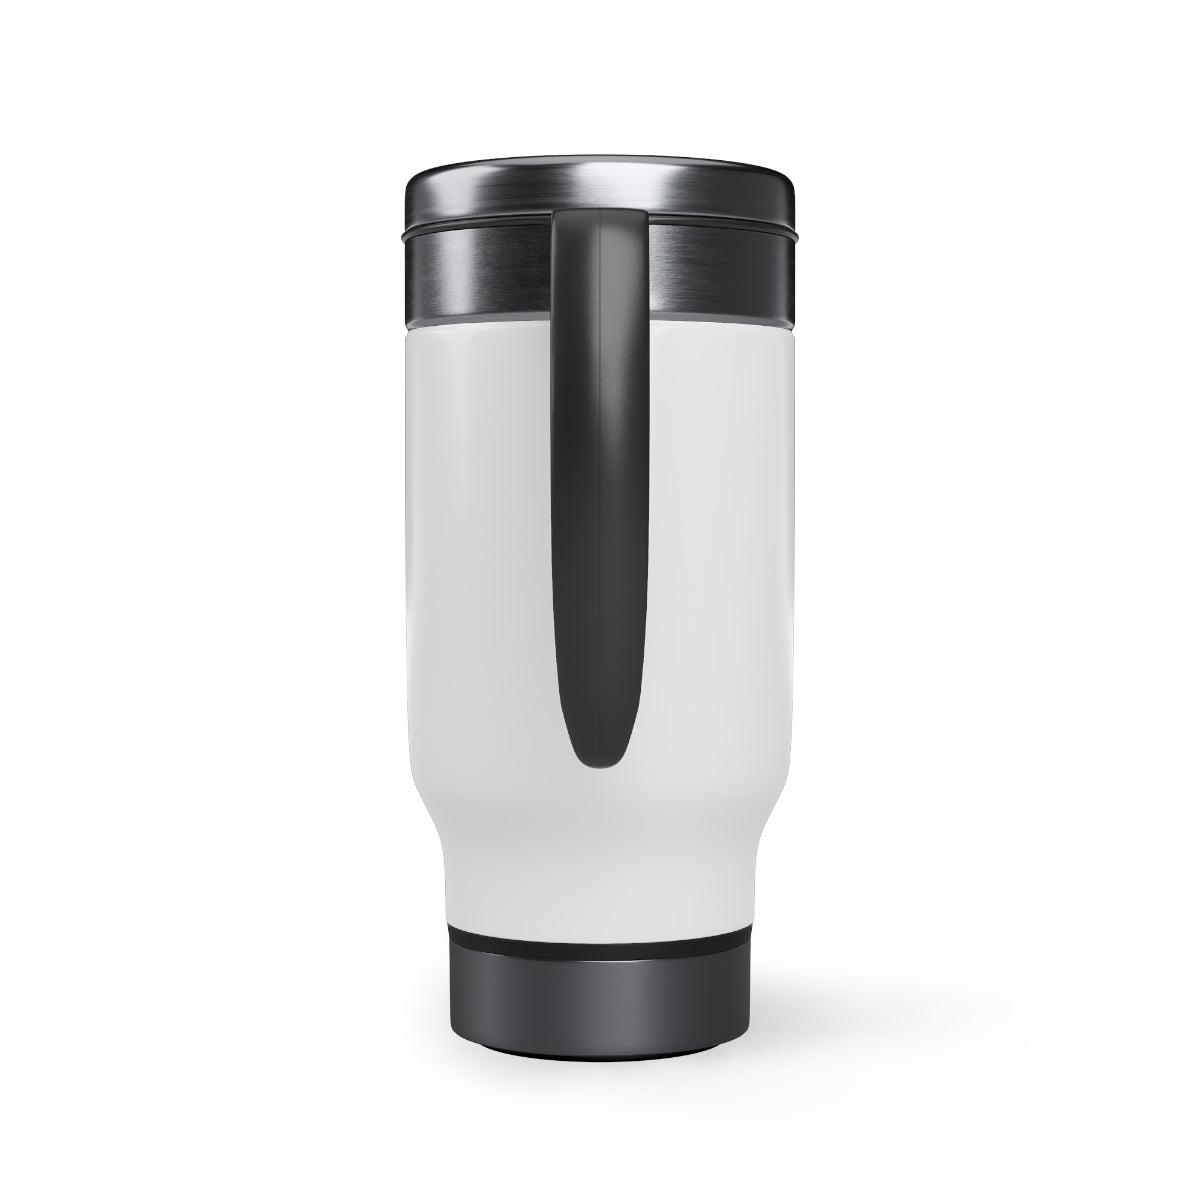 GLH Stainless Steel Travel Mug with Handle, 14oz